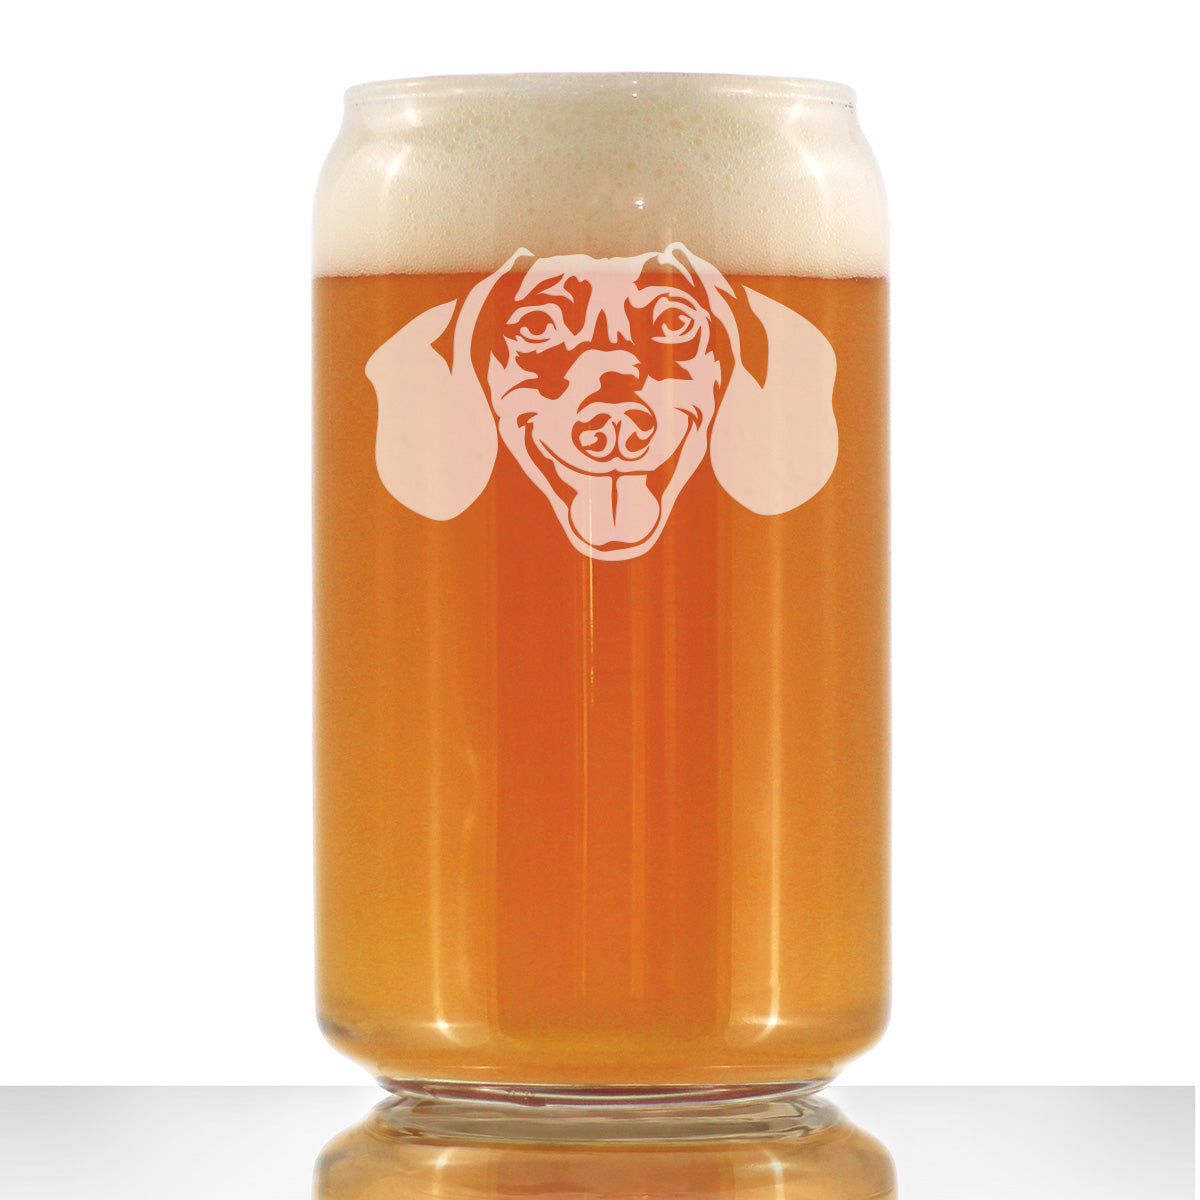 Dachshund Face Beer Can Pint Glass - Unique Dog Themed Decor and Gifts for Moms &amp; Dads of Dachshunds - 16 Oz